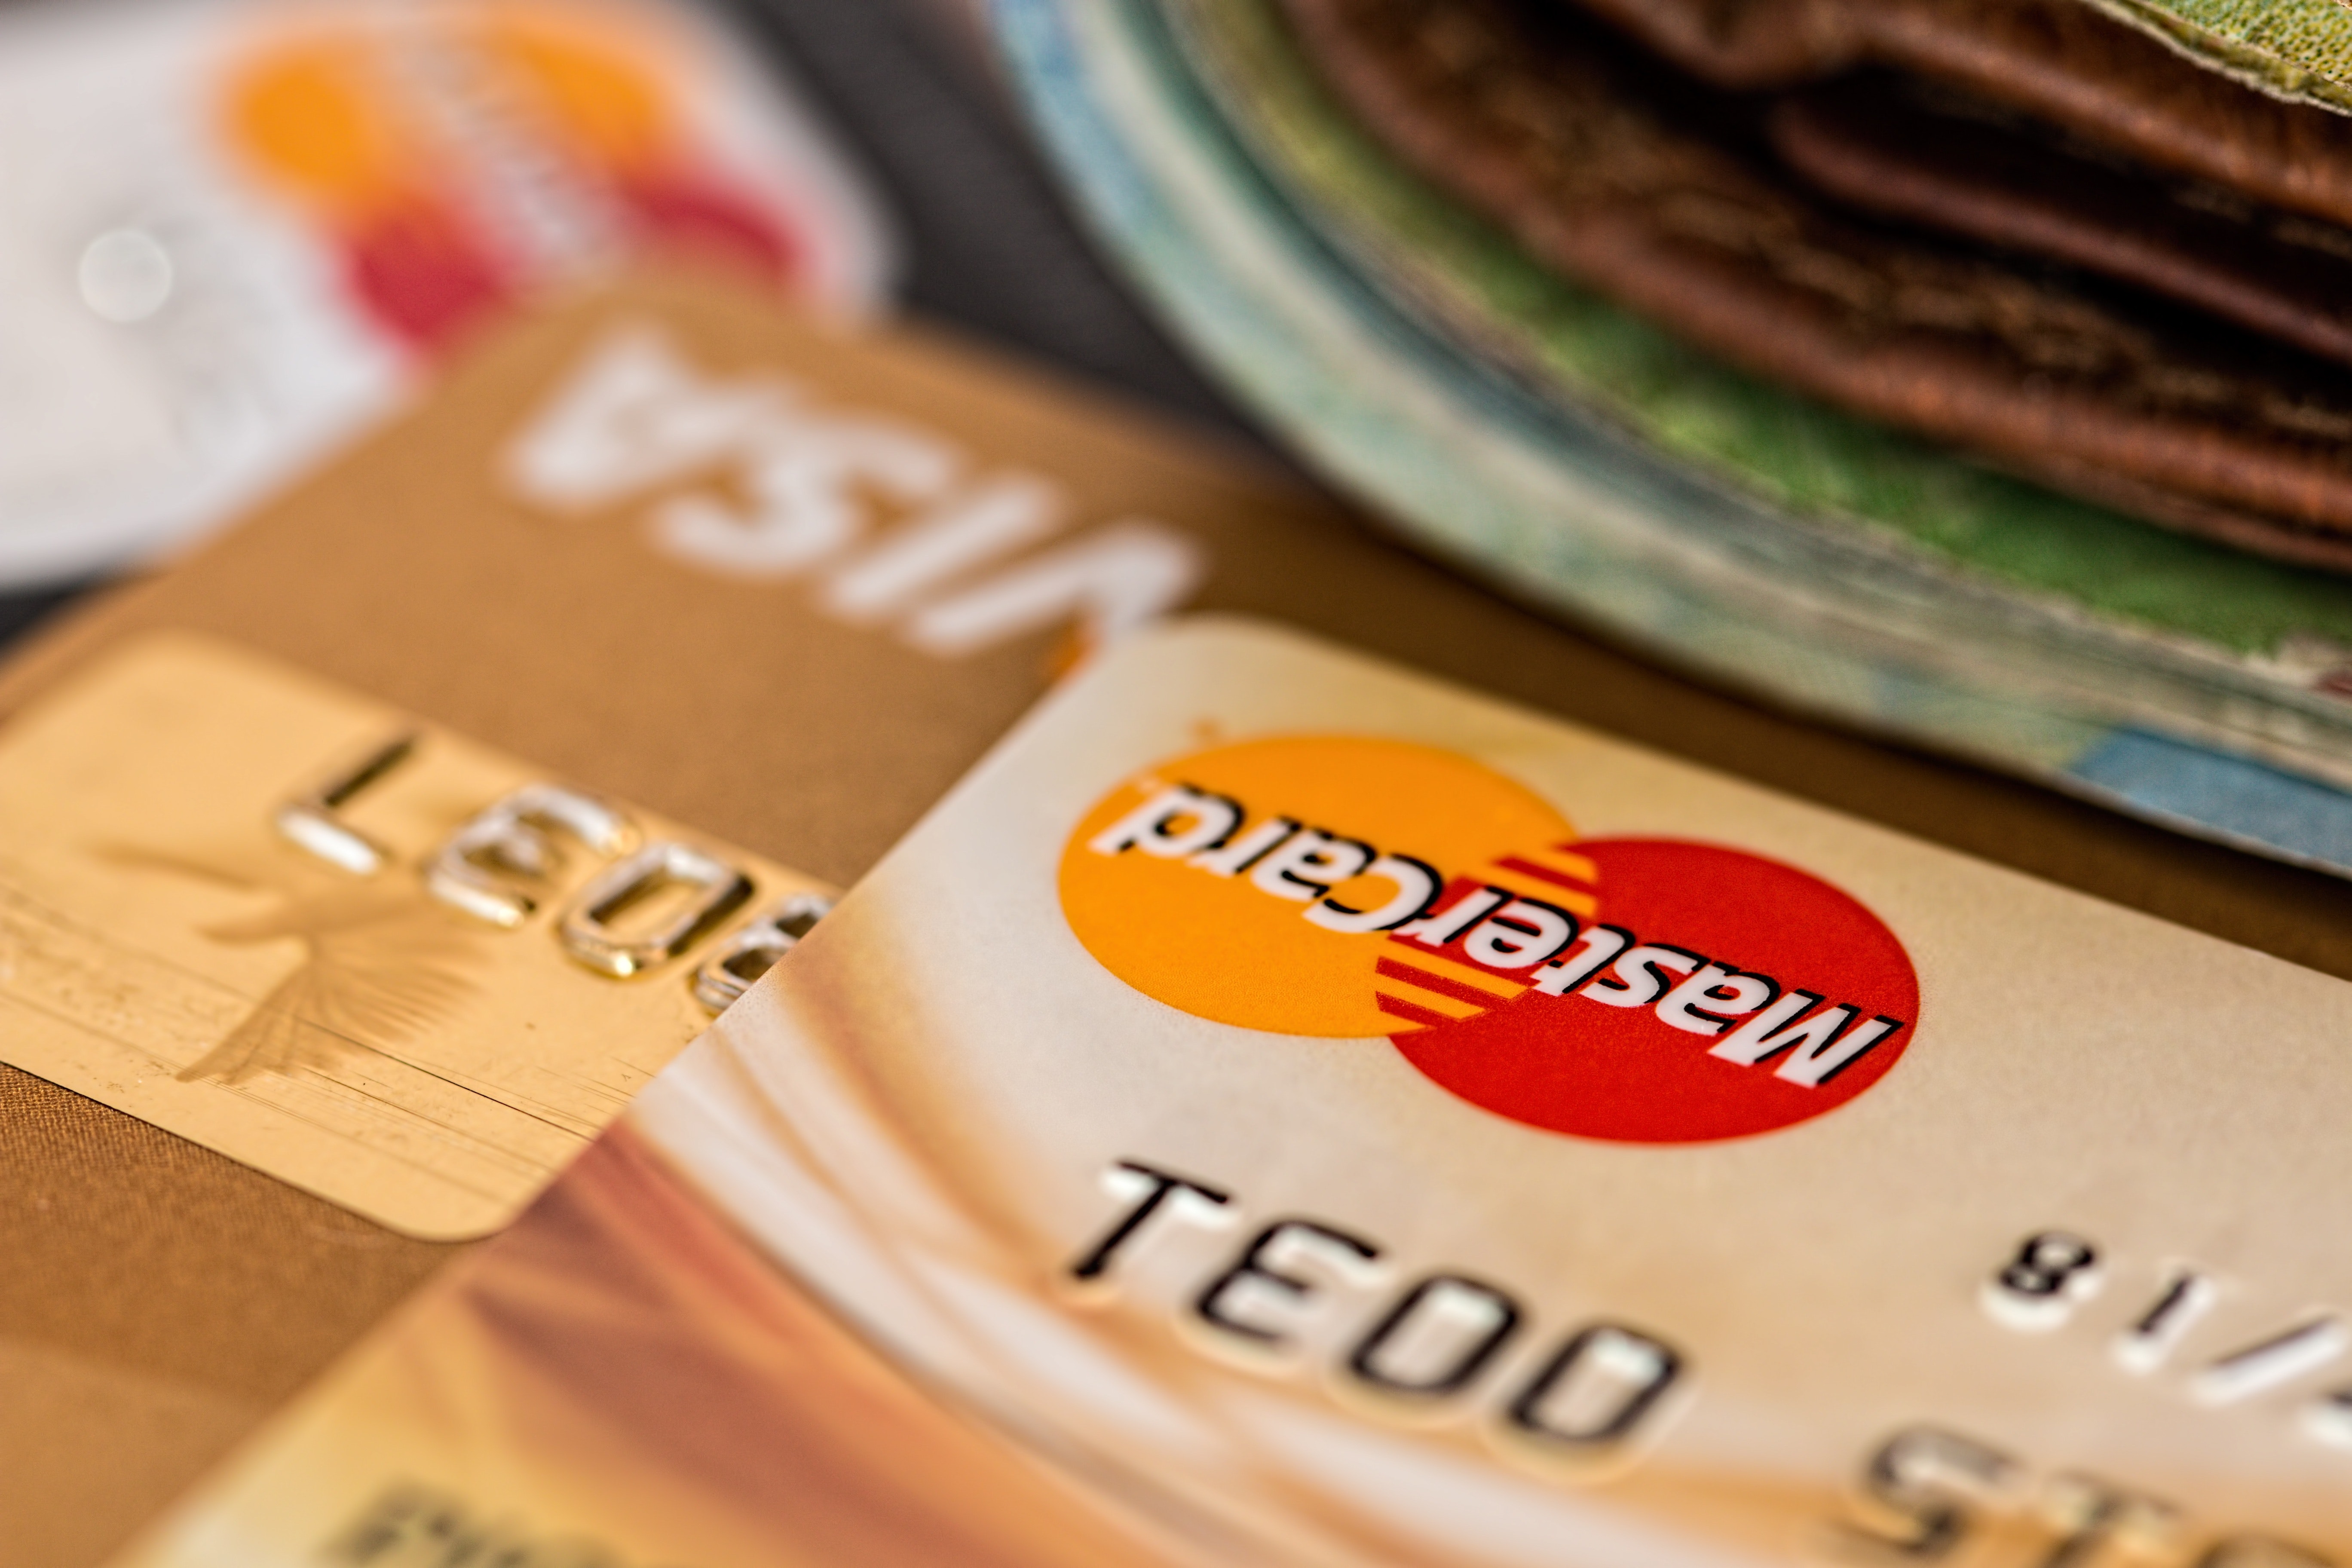 78% of Americans today have credit cards